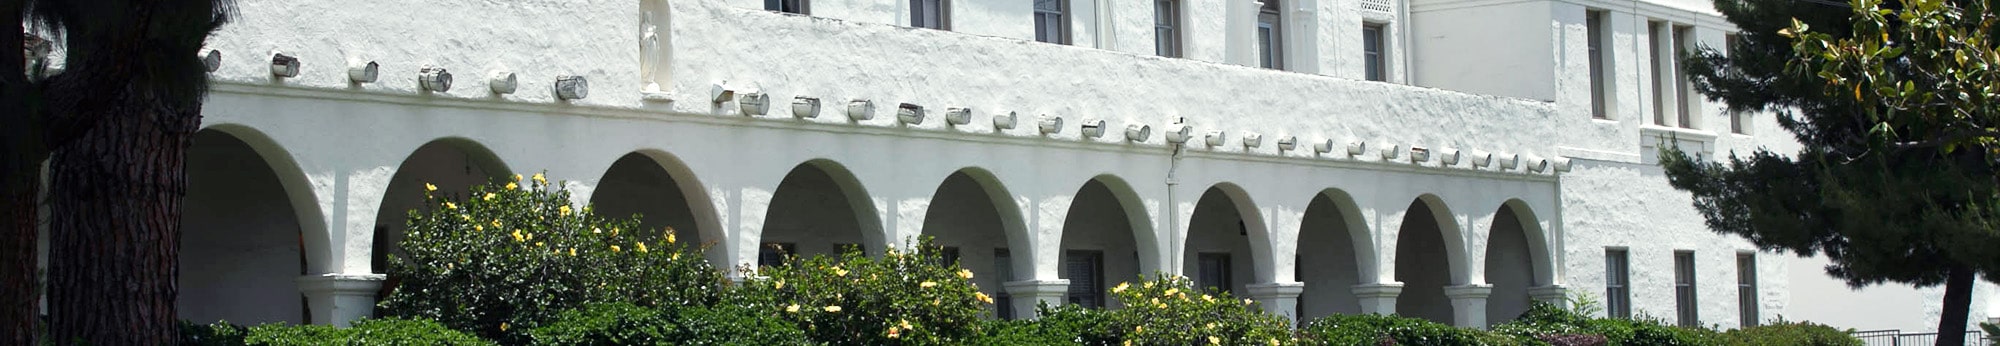 Side view of Nazarath School highlighting the arches